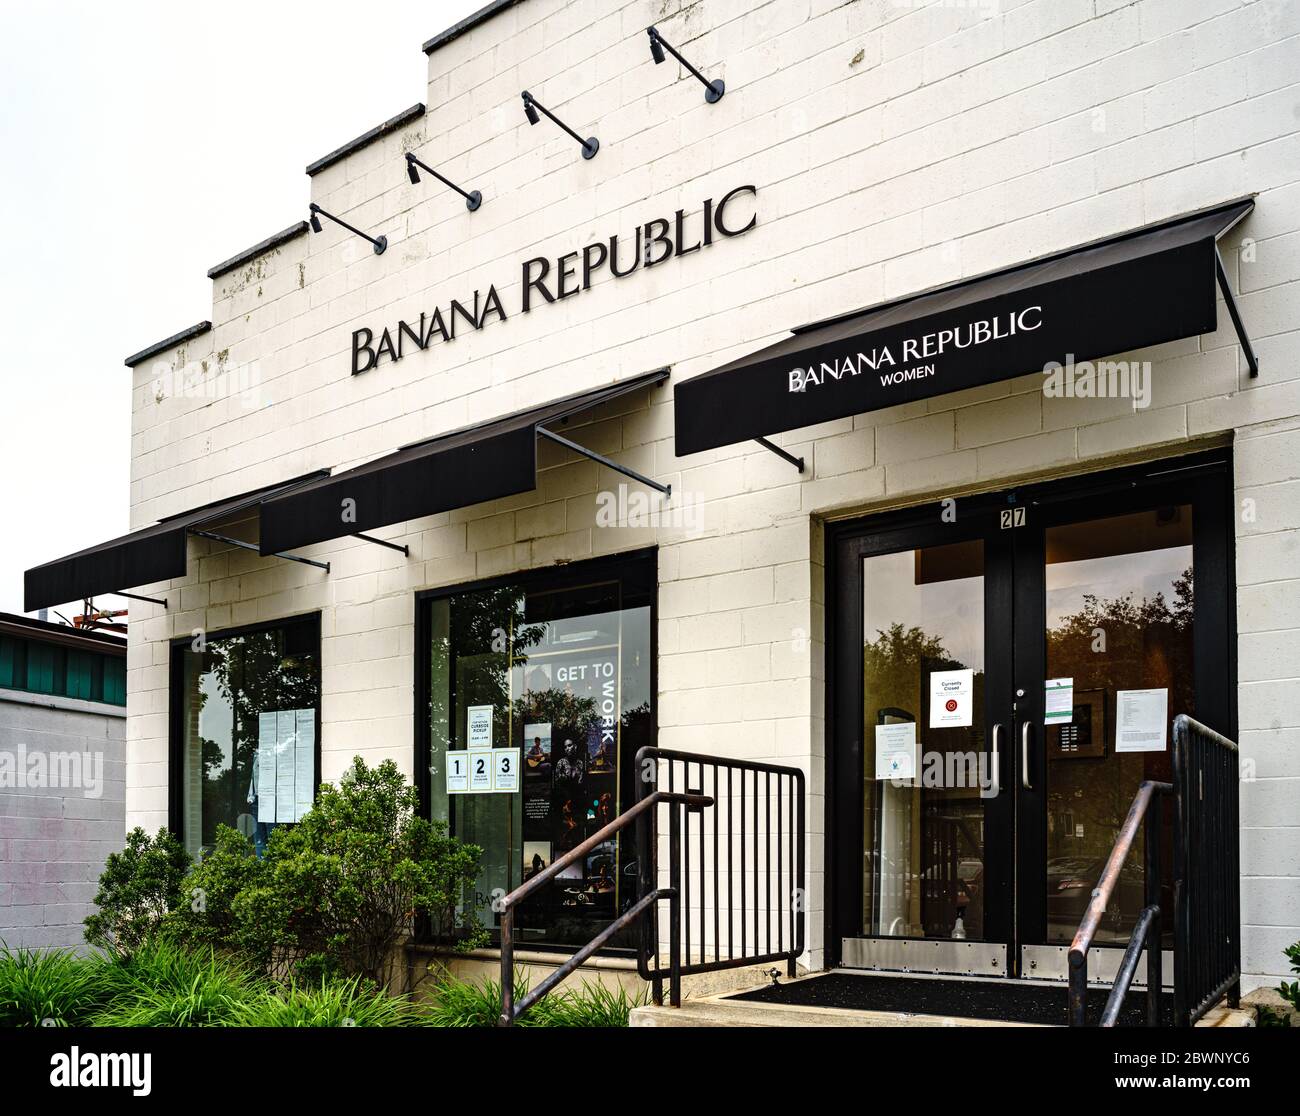 Mount Kisco, New York May 29, 2020: As Westchester County NY begins Phase 1 of its limited reopening after the coronavirus pandemic, retail clothing stores such as Banana Republic provide curbside pickup due to the need for continued social distancing. Stock Photo